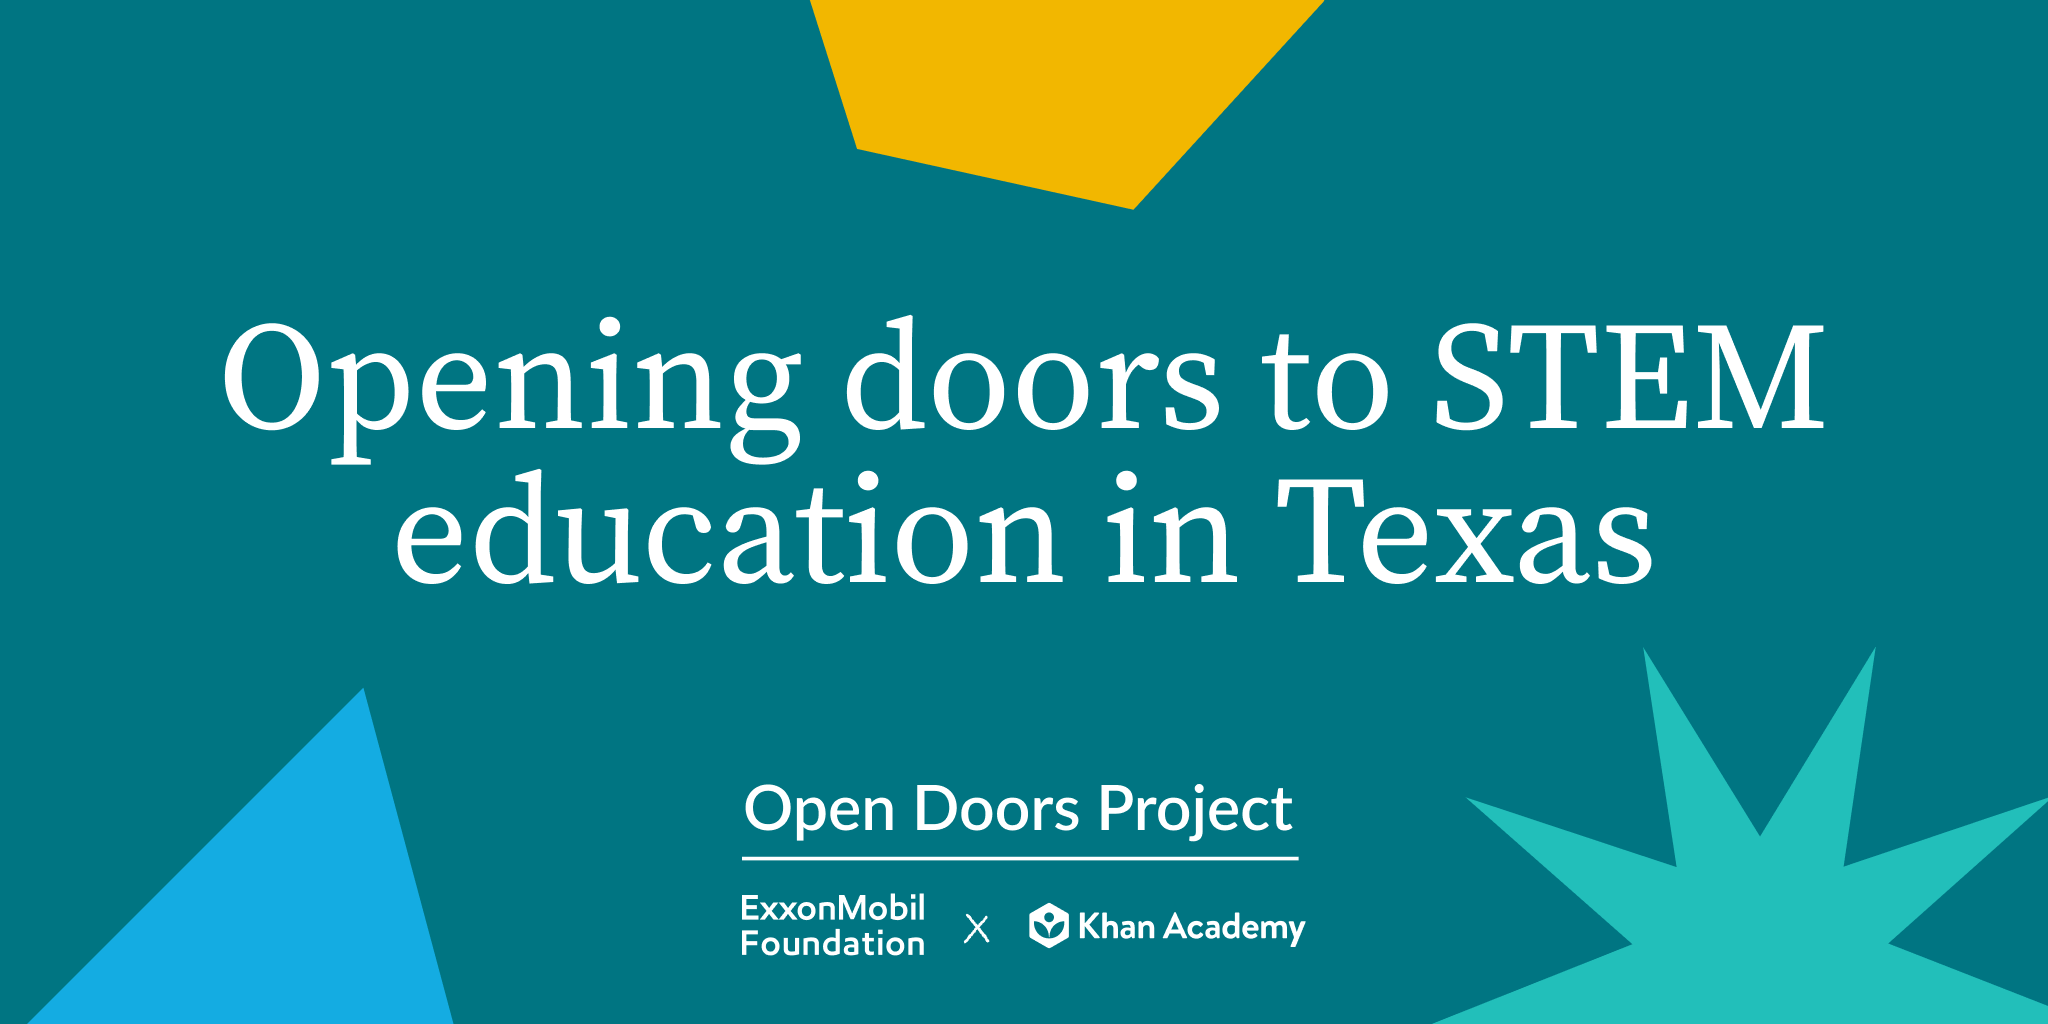 Opening doors to STEM education in Texas. Exxon Mobil Foundation and Khan Academy